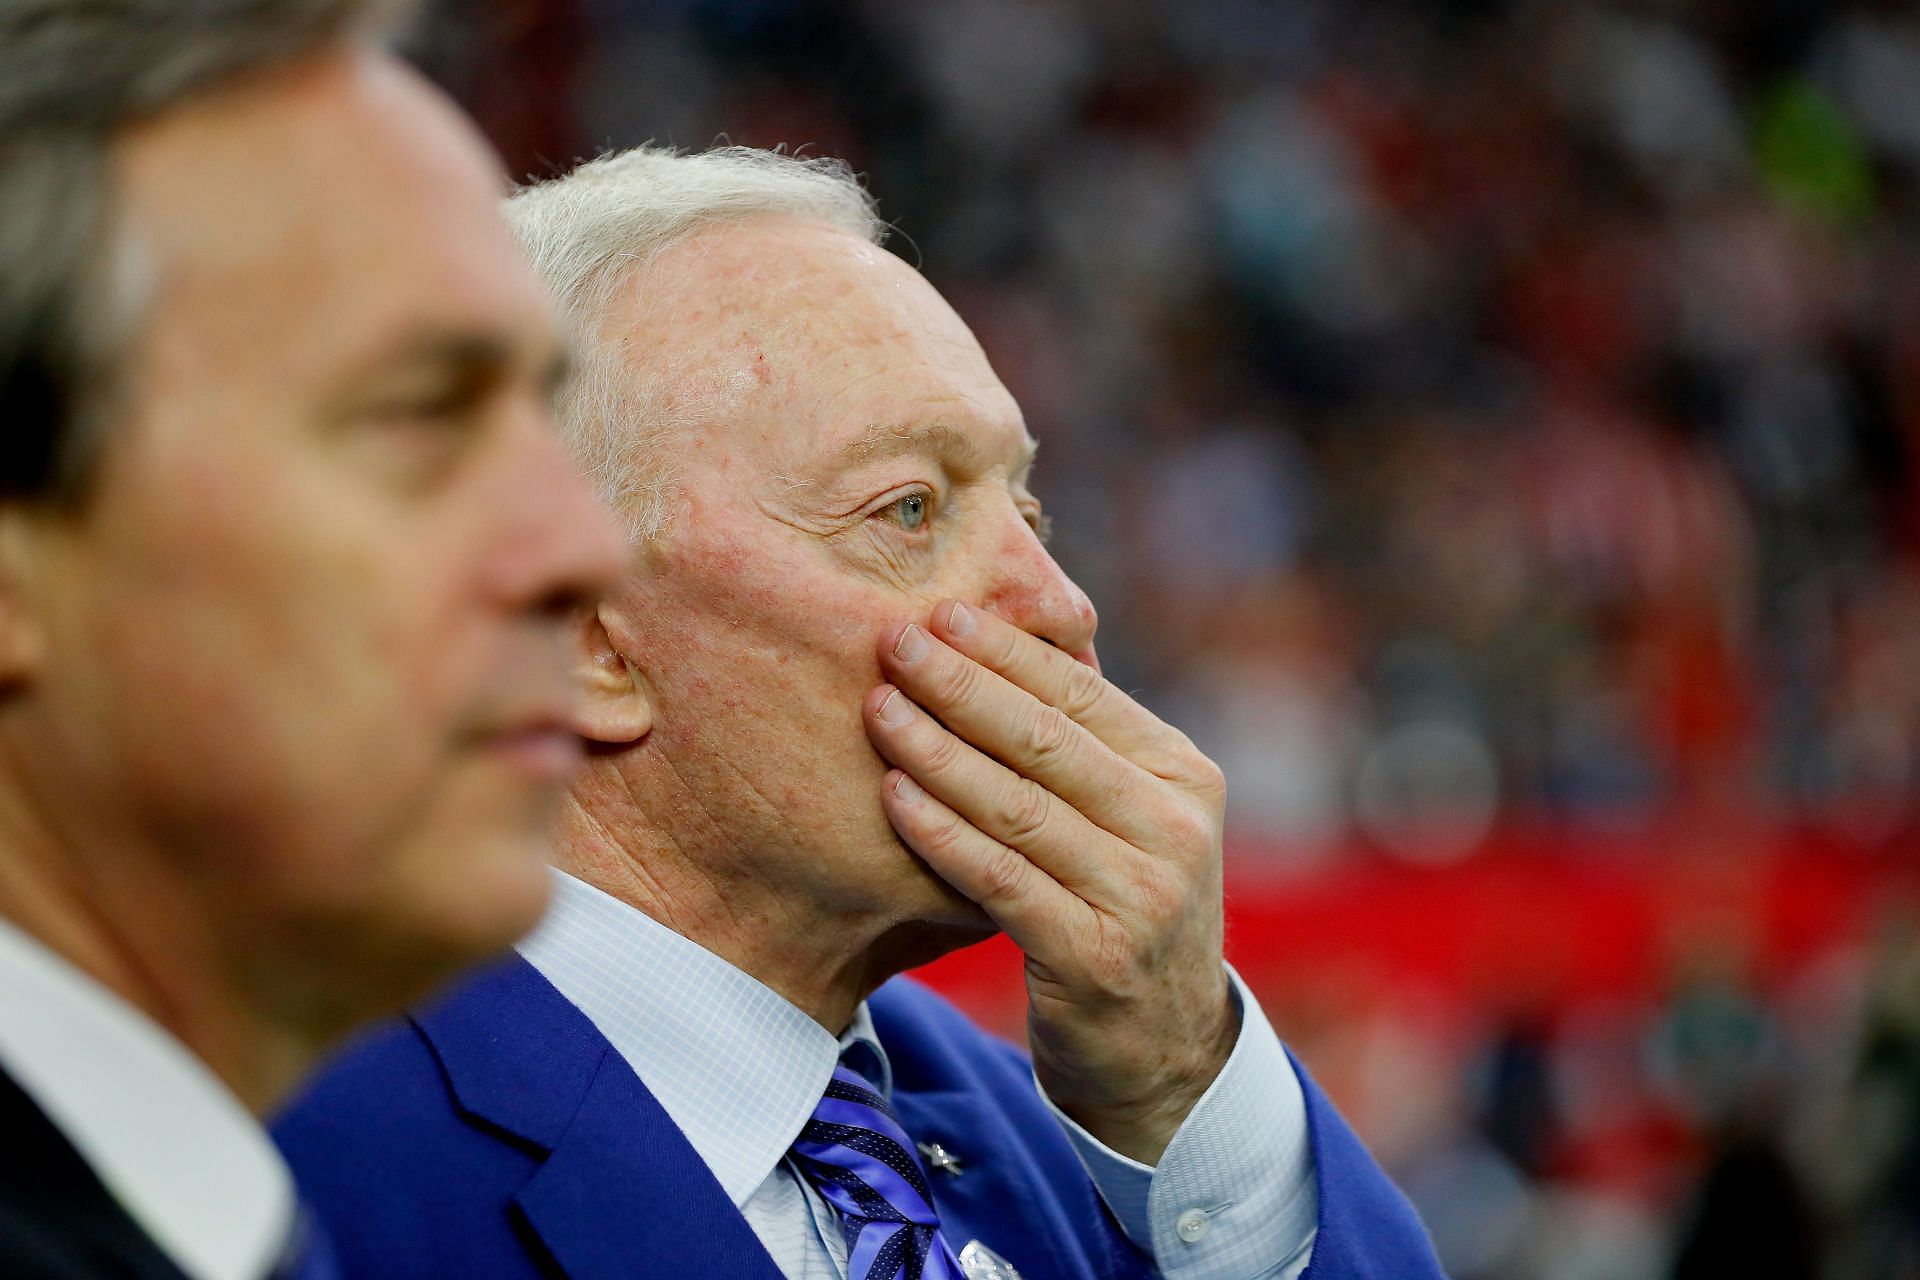 Dallas Cowboys owner/general manager Jerry Jones